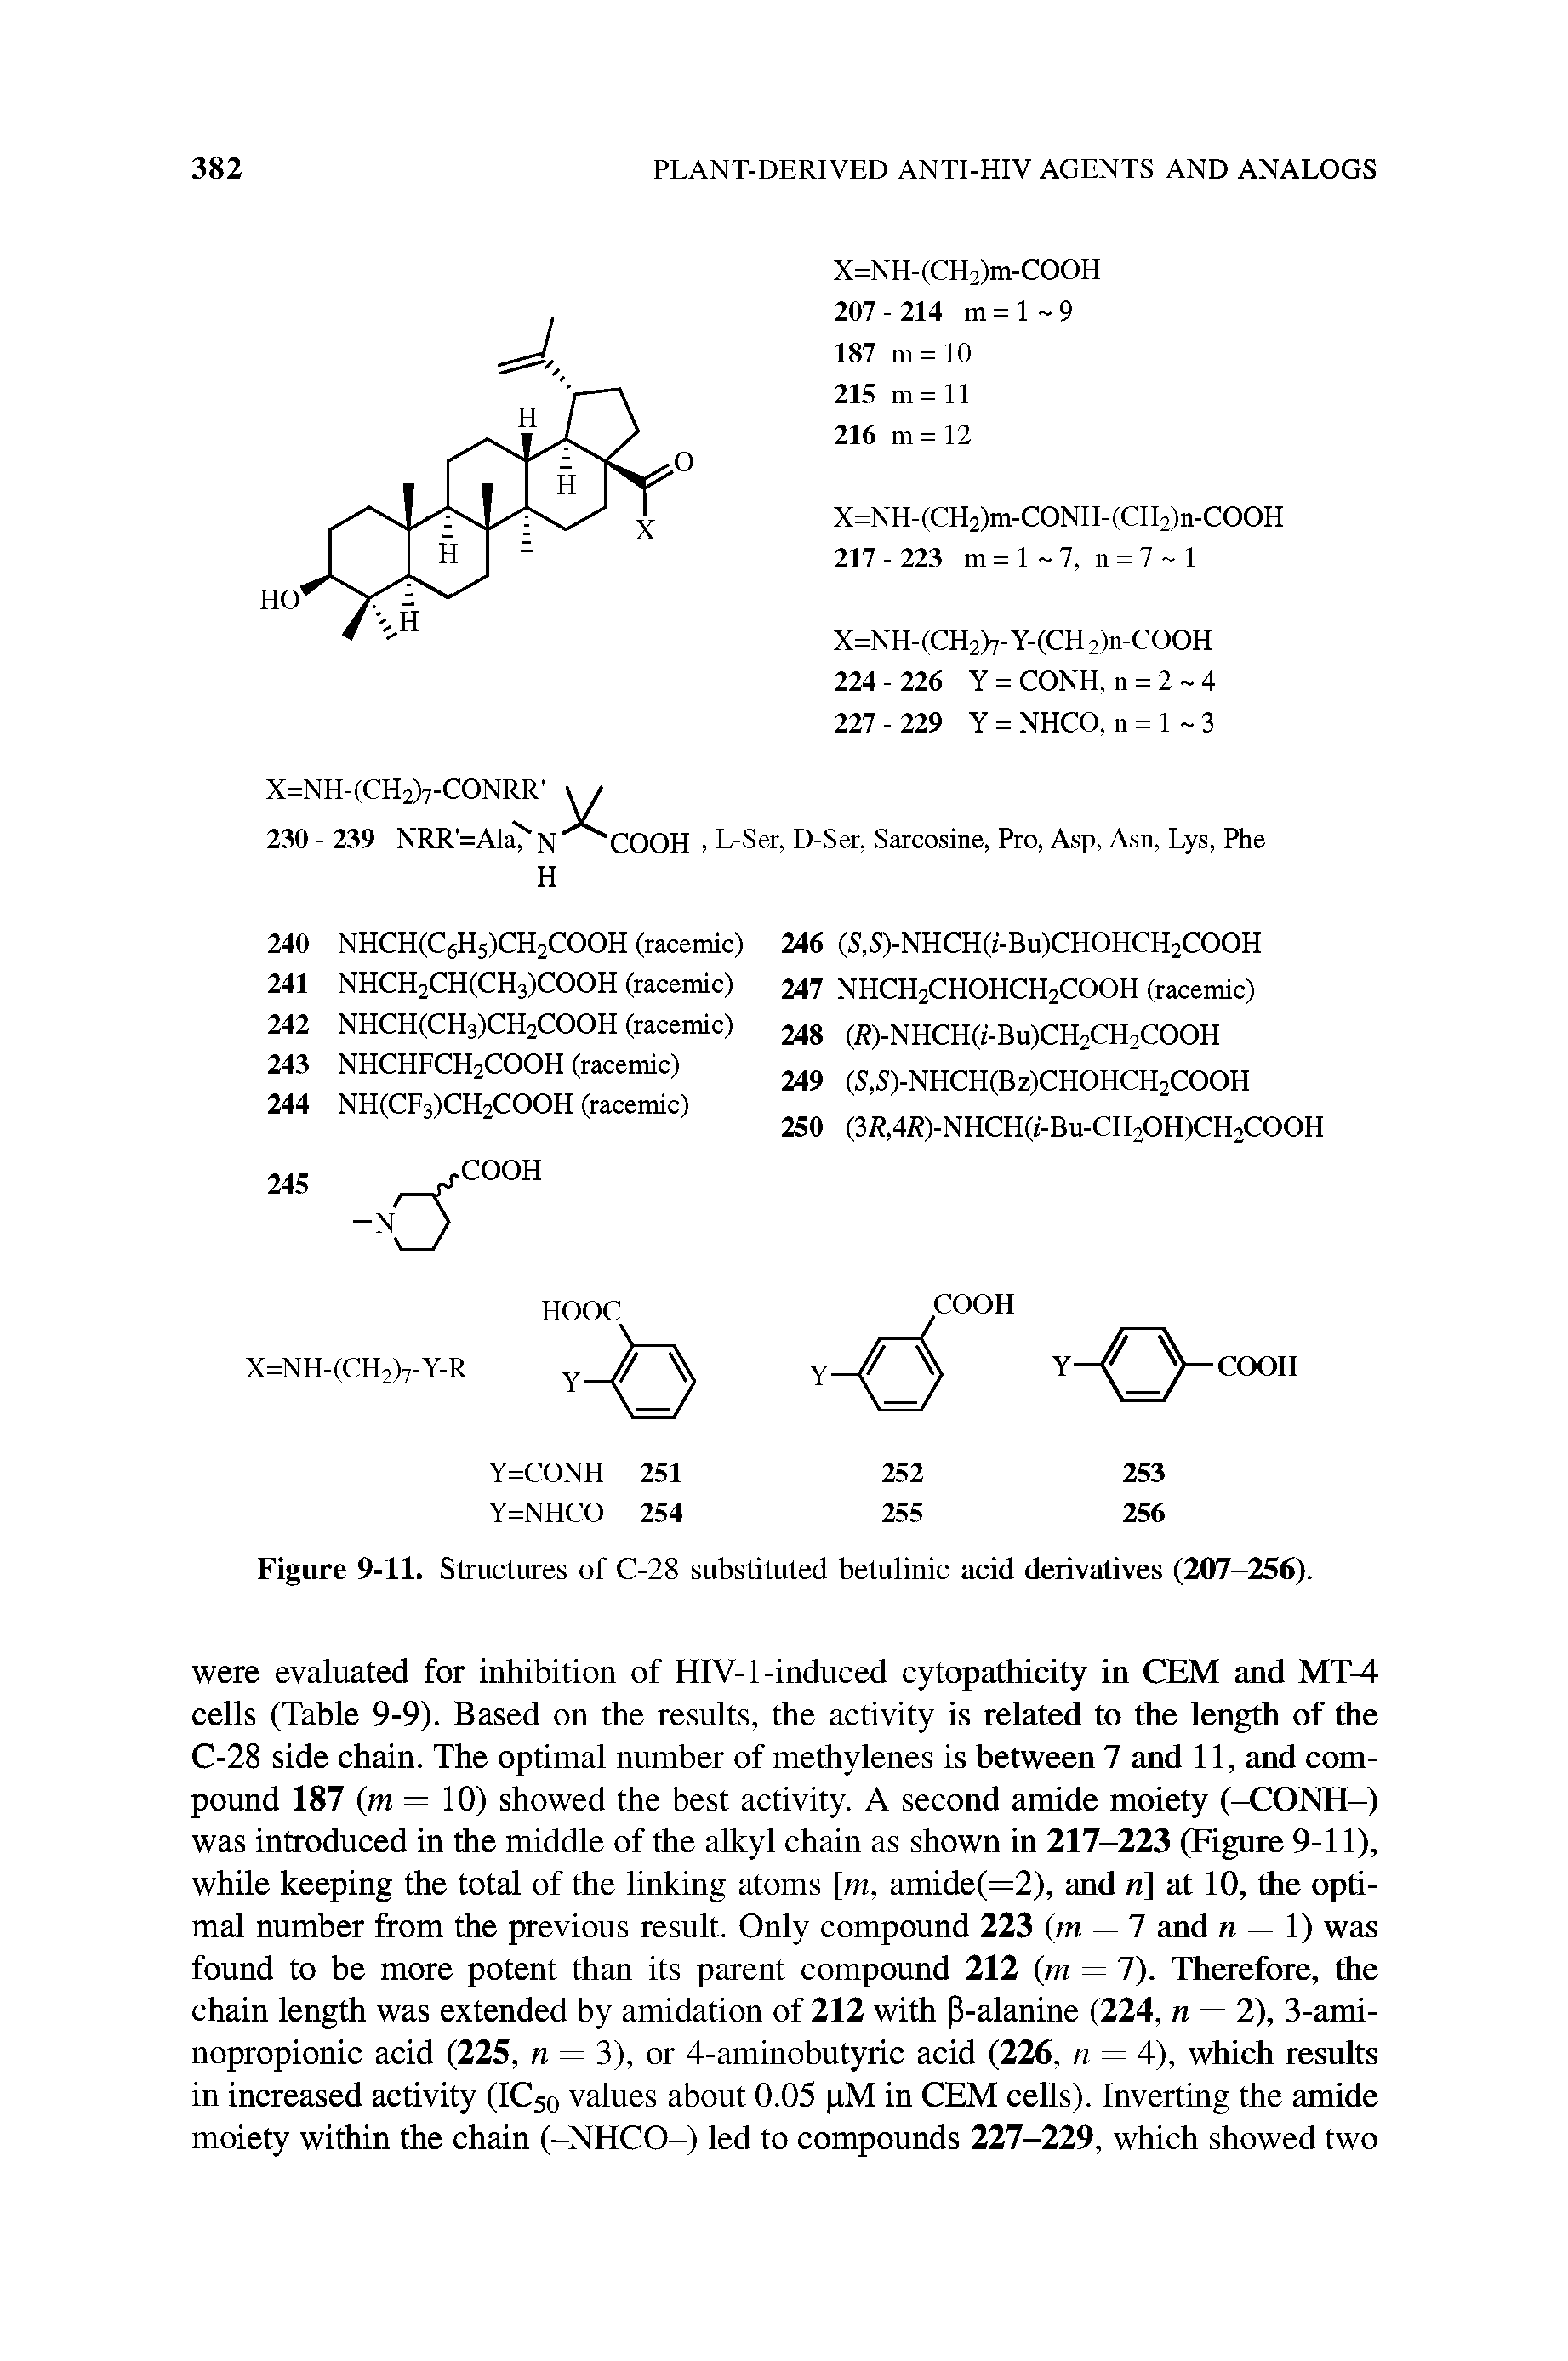 Figure 9-11. Structures of C-28 substituted betulinic acid derivatives (207 256).